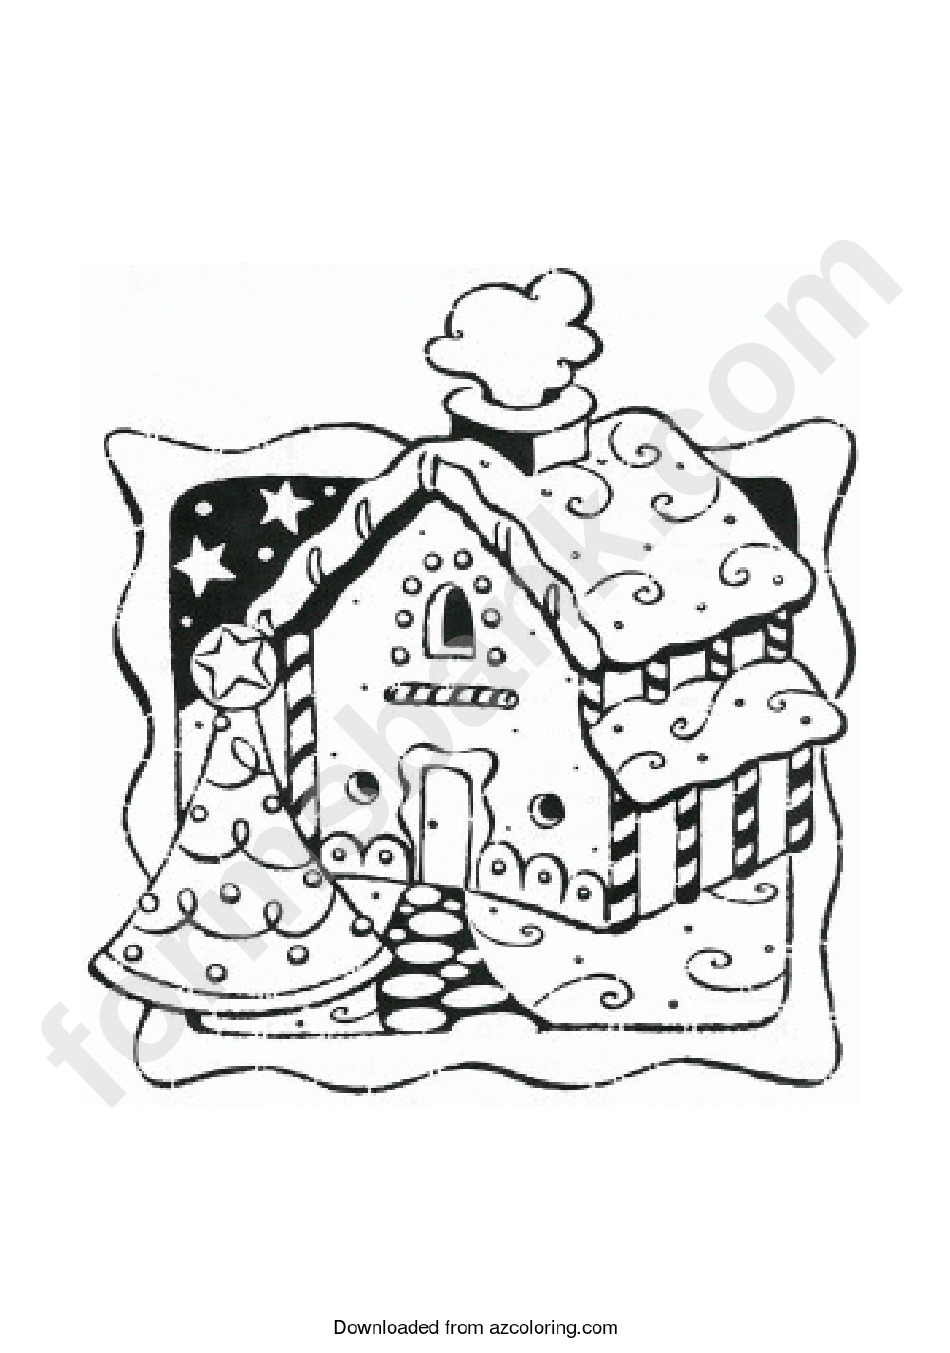 Gingerbread House Coloring Sheet